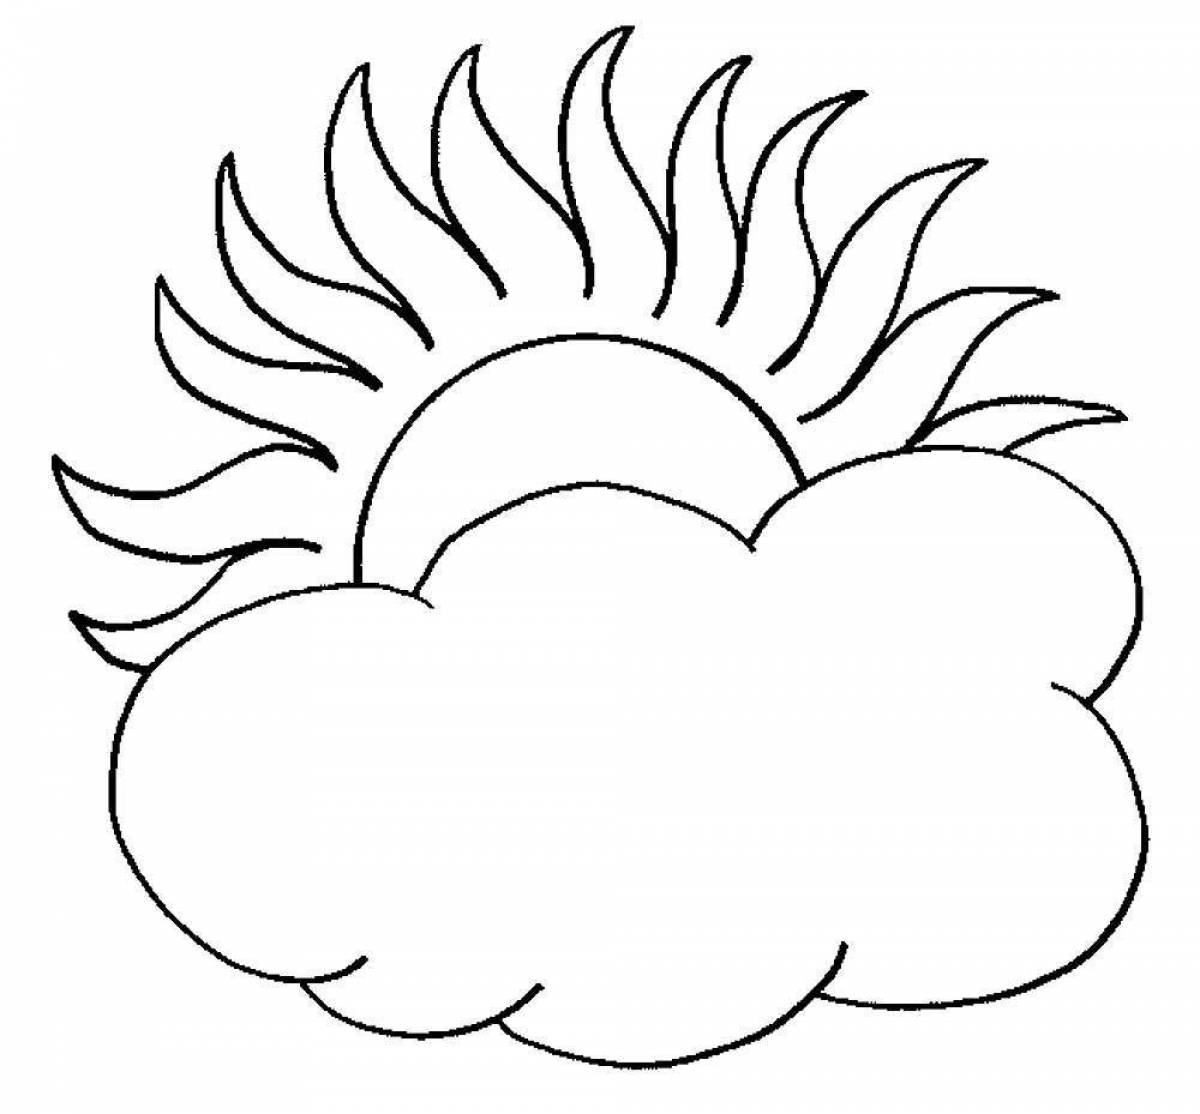 Glowing clouds coloring book for kids